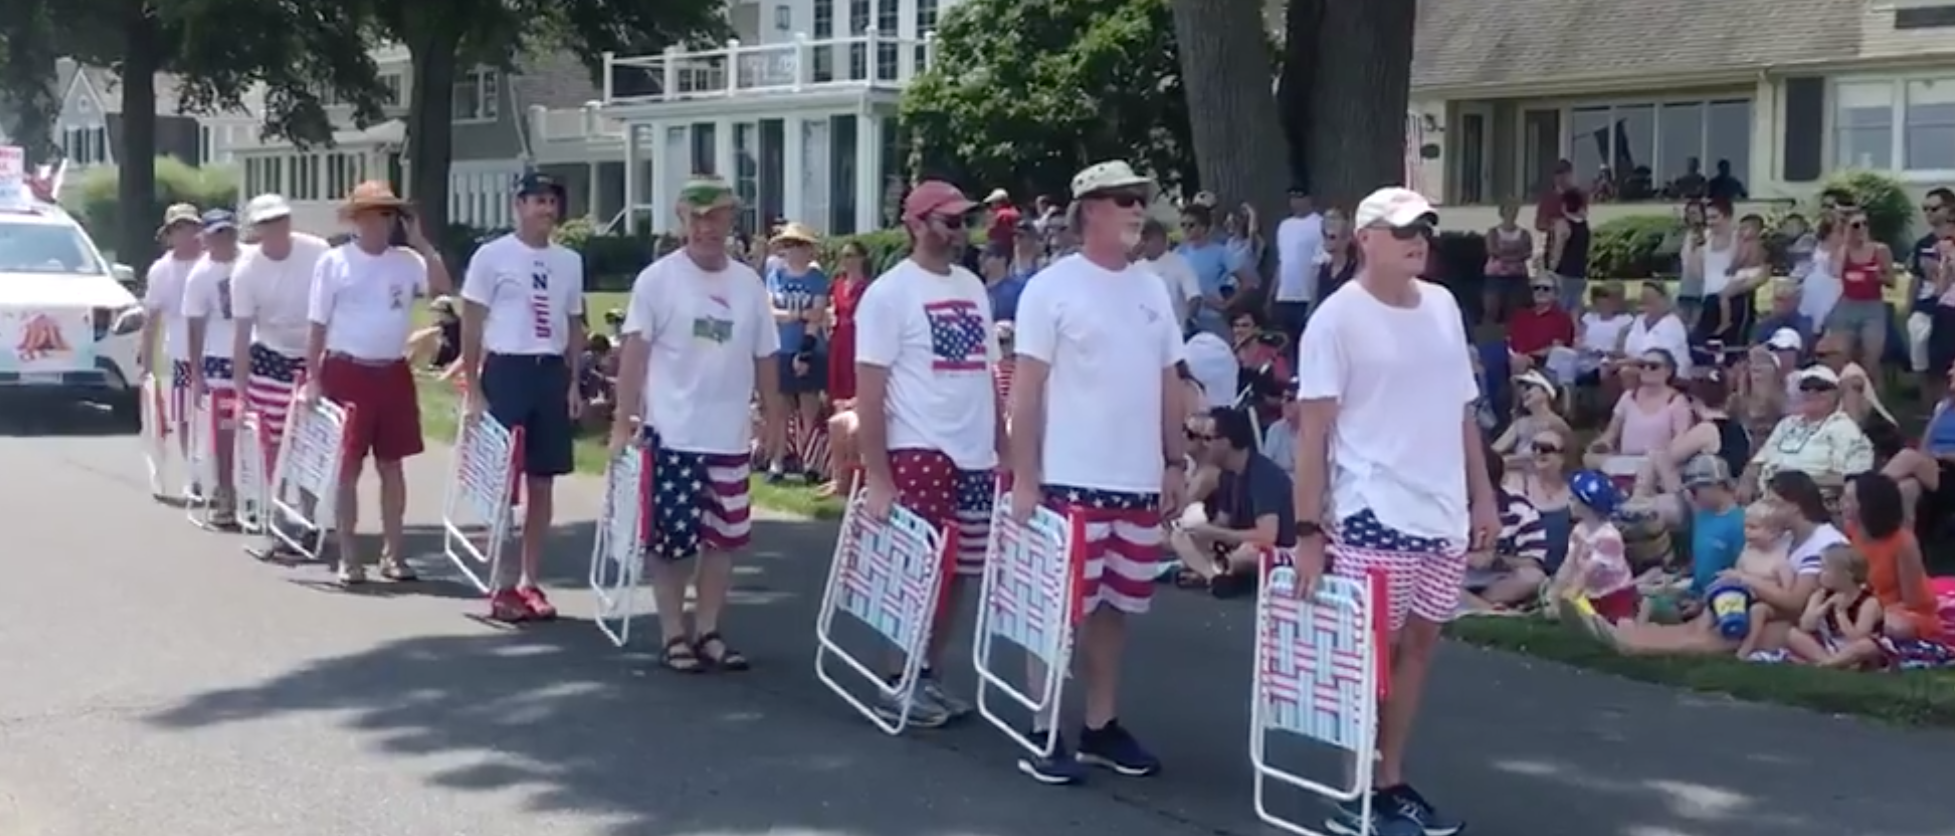 Lawn Chair Drill Team Rocks Annapolis Fourth of July Parade The Daily